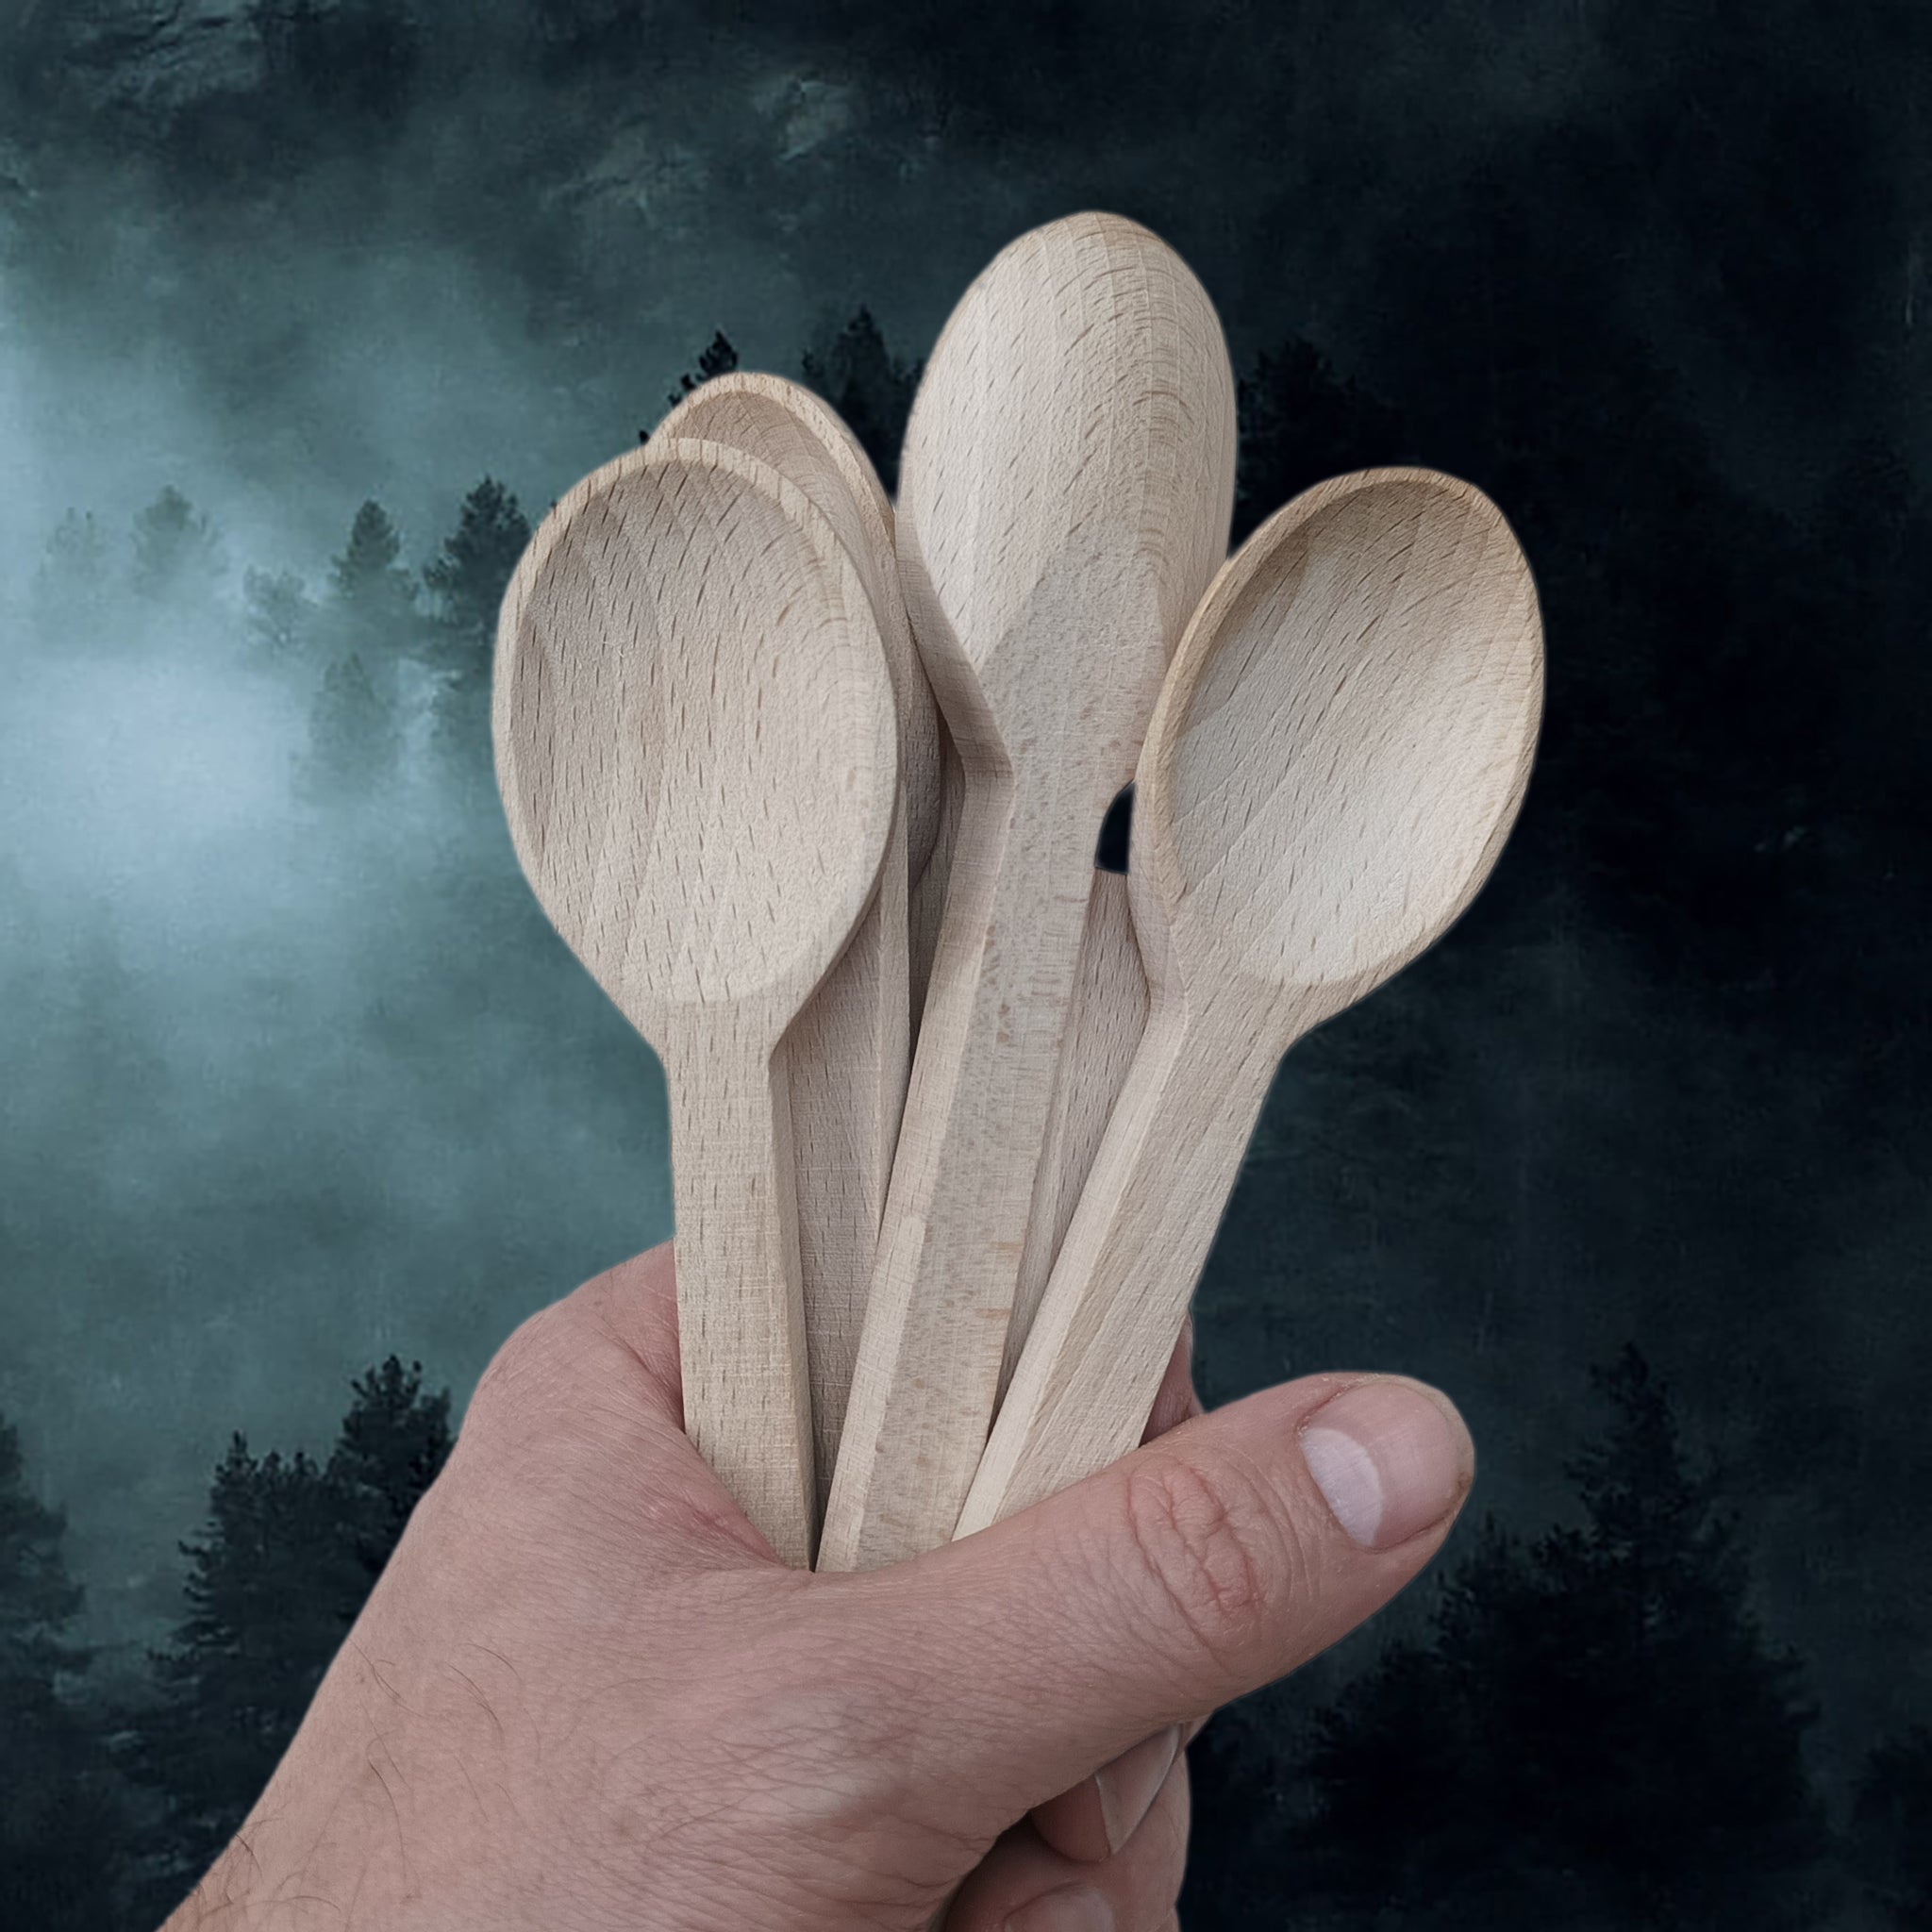 Large Wooden Viking / Medieval Spoons in Hand